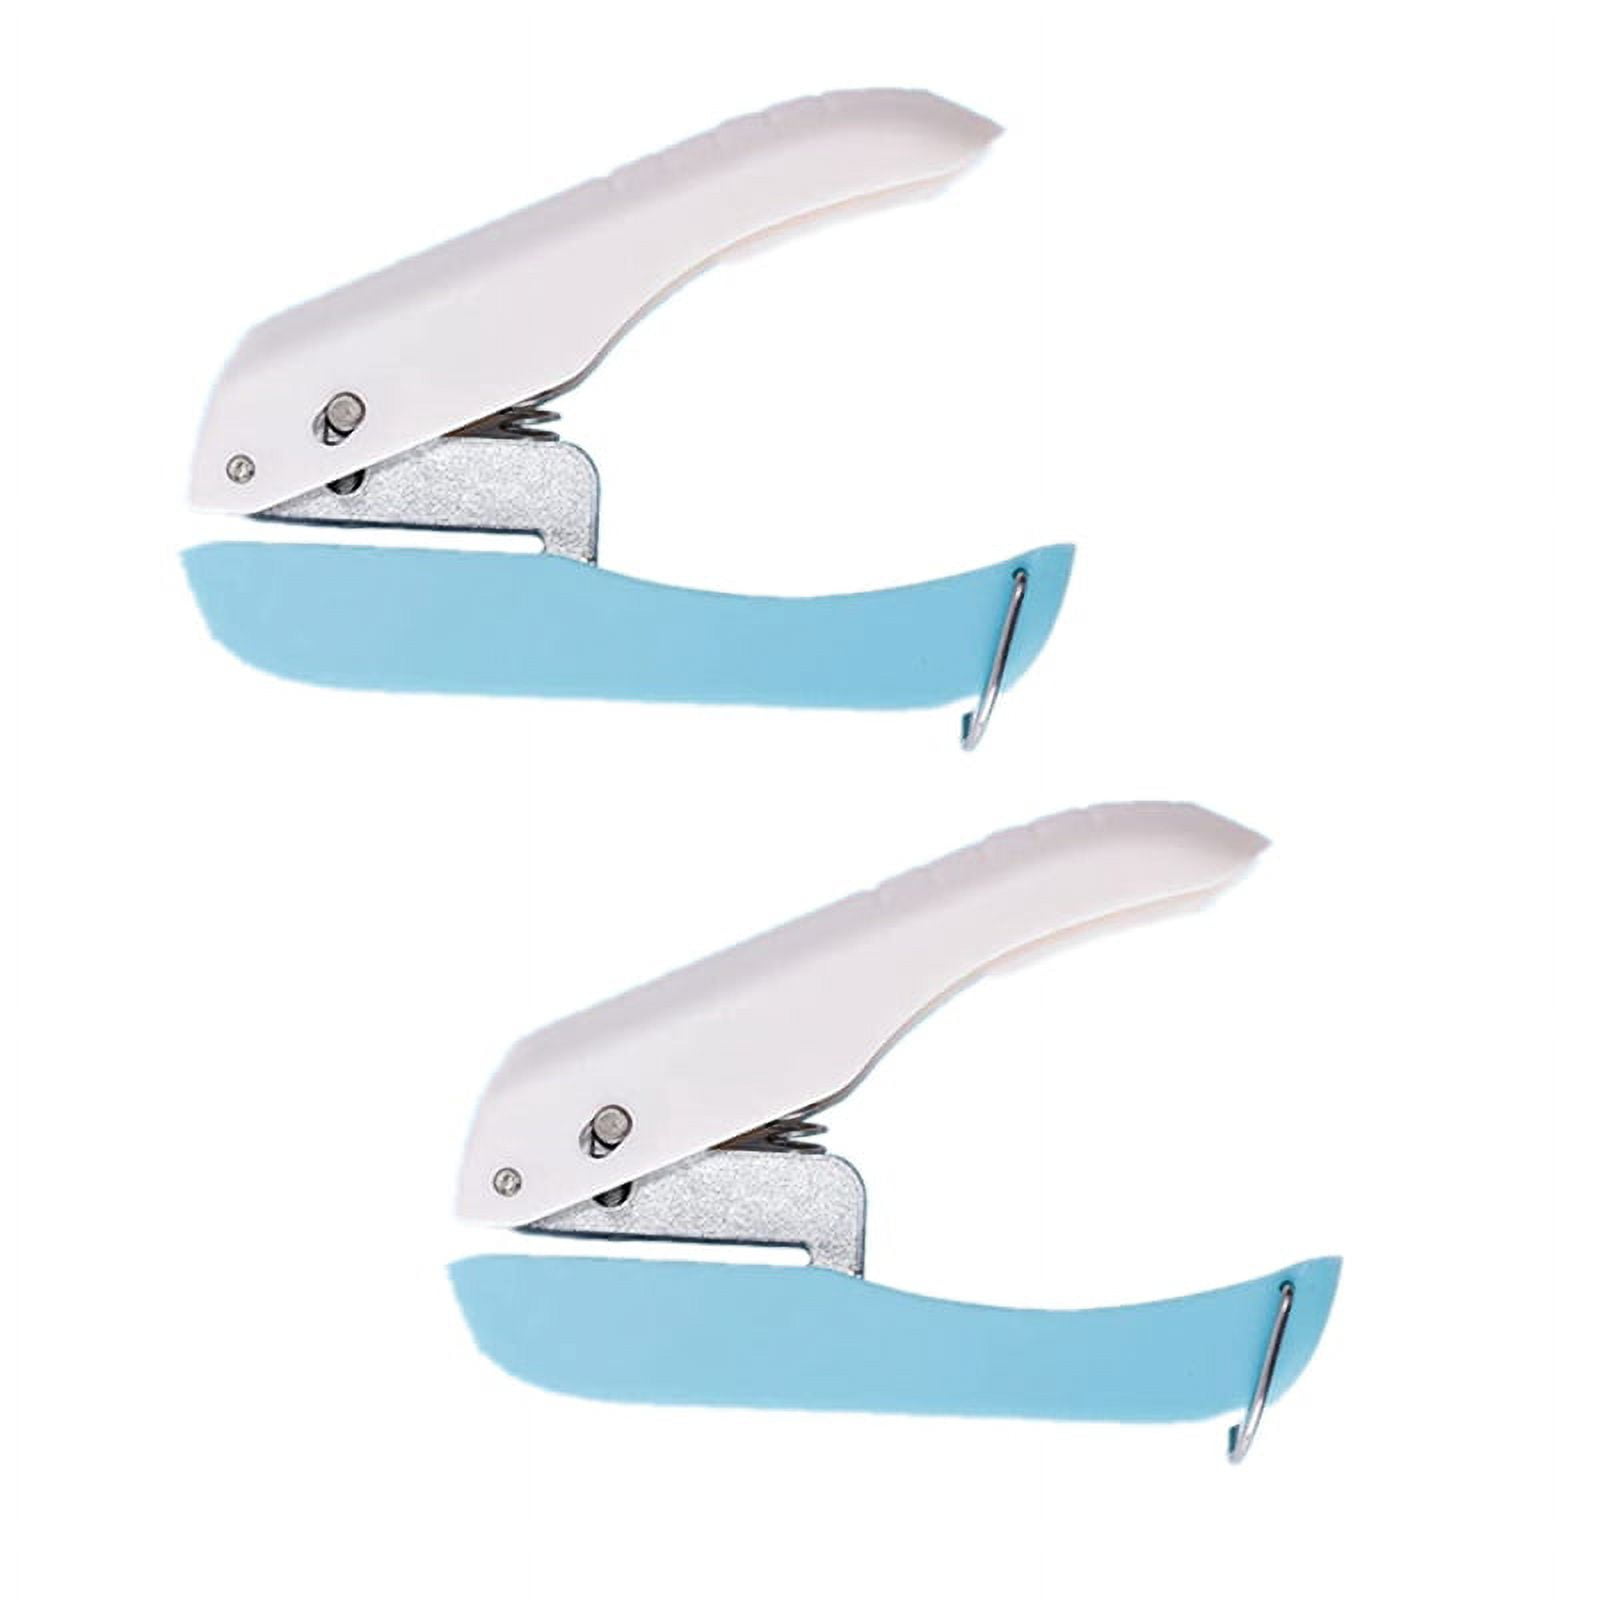 HOSL Single Hole Punch 2 Pack (1/16in) One Hole Puncher Tool for Paper  Craft Hand Slot Punch Alloy Steel Perfect for DIY Home Office School (Paper